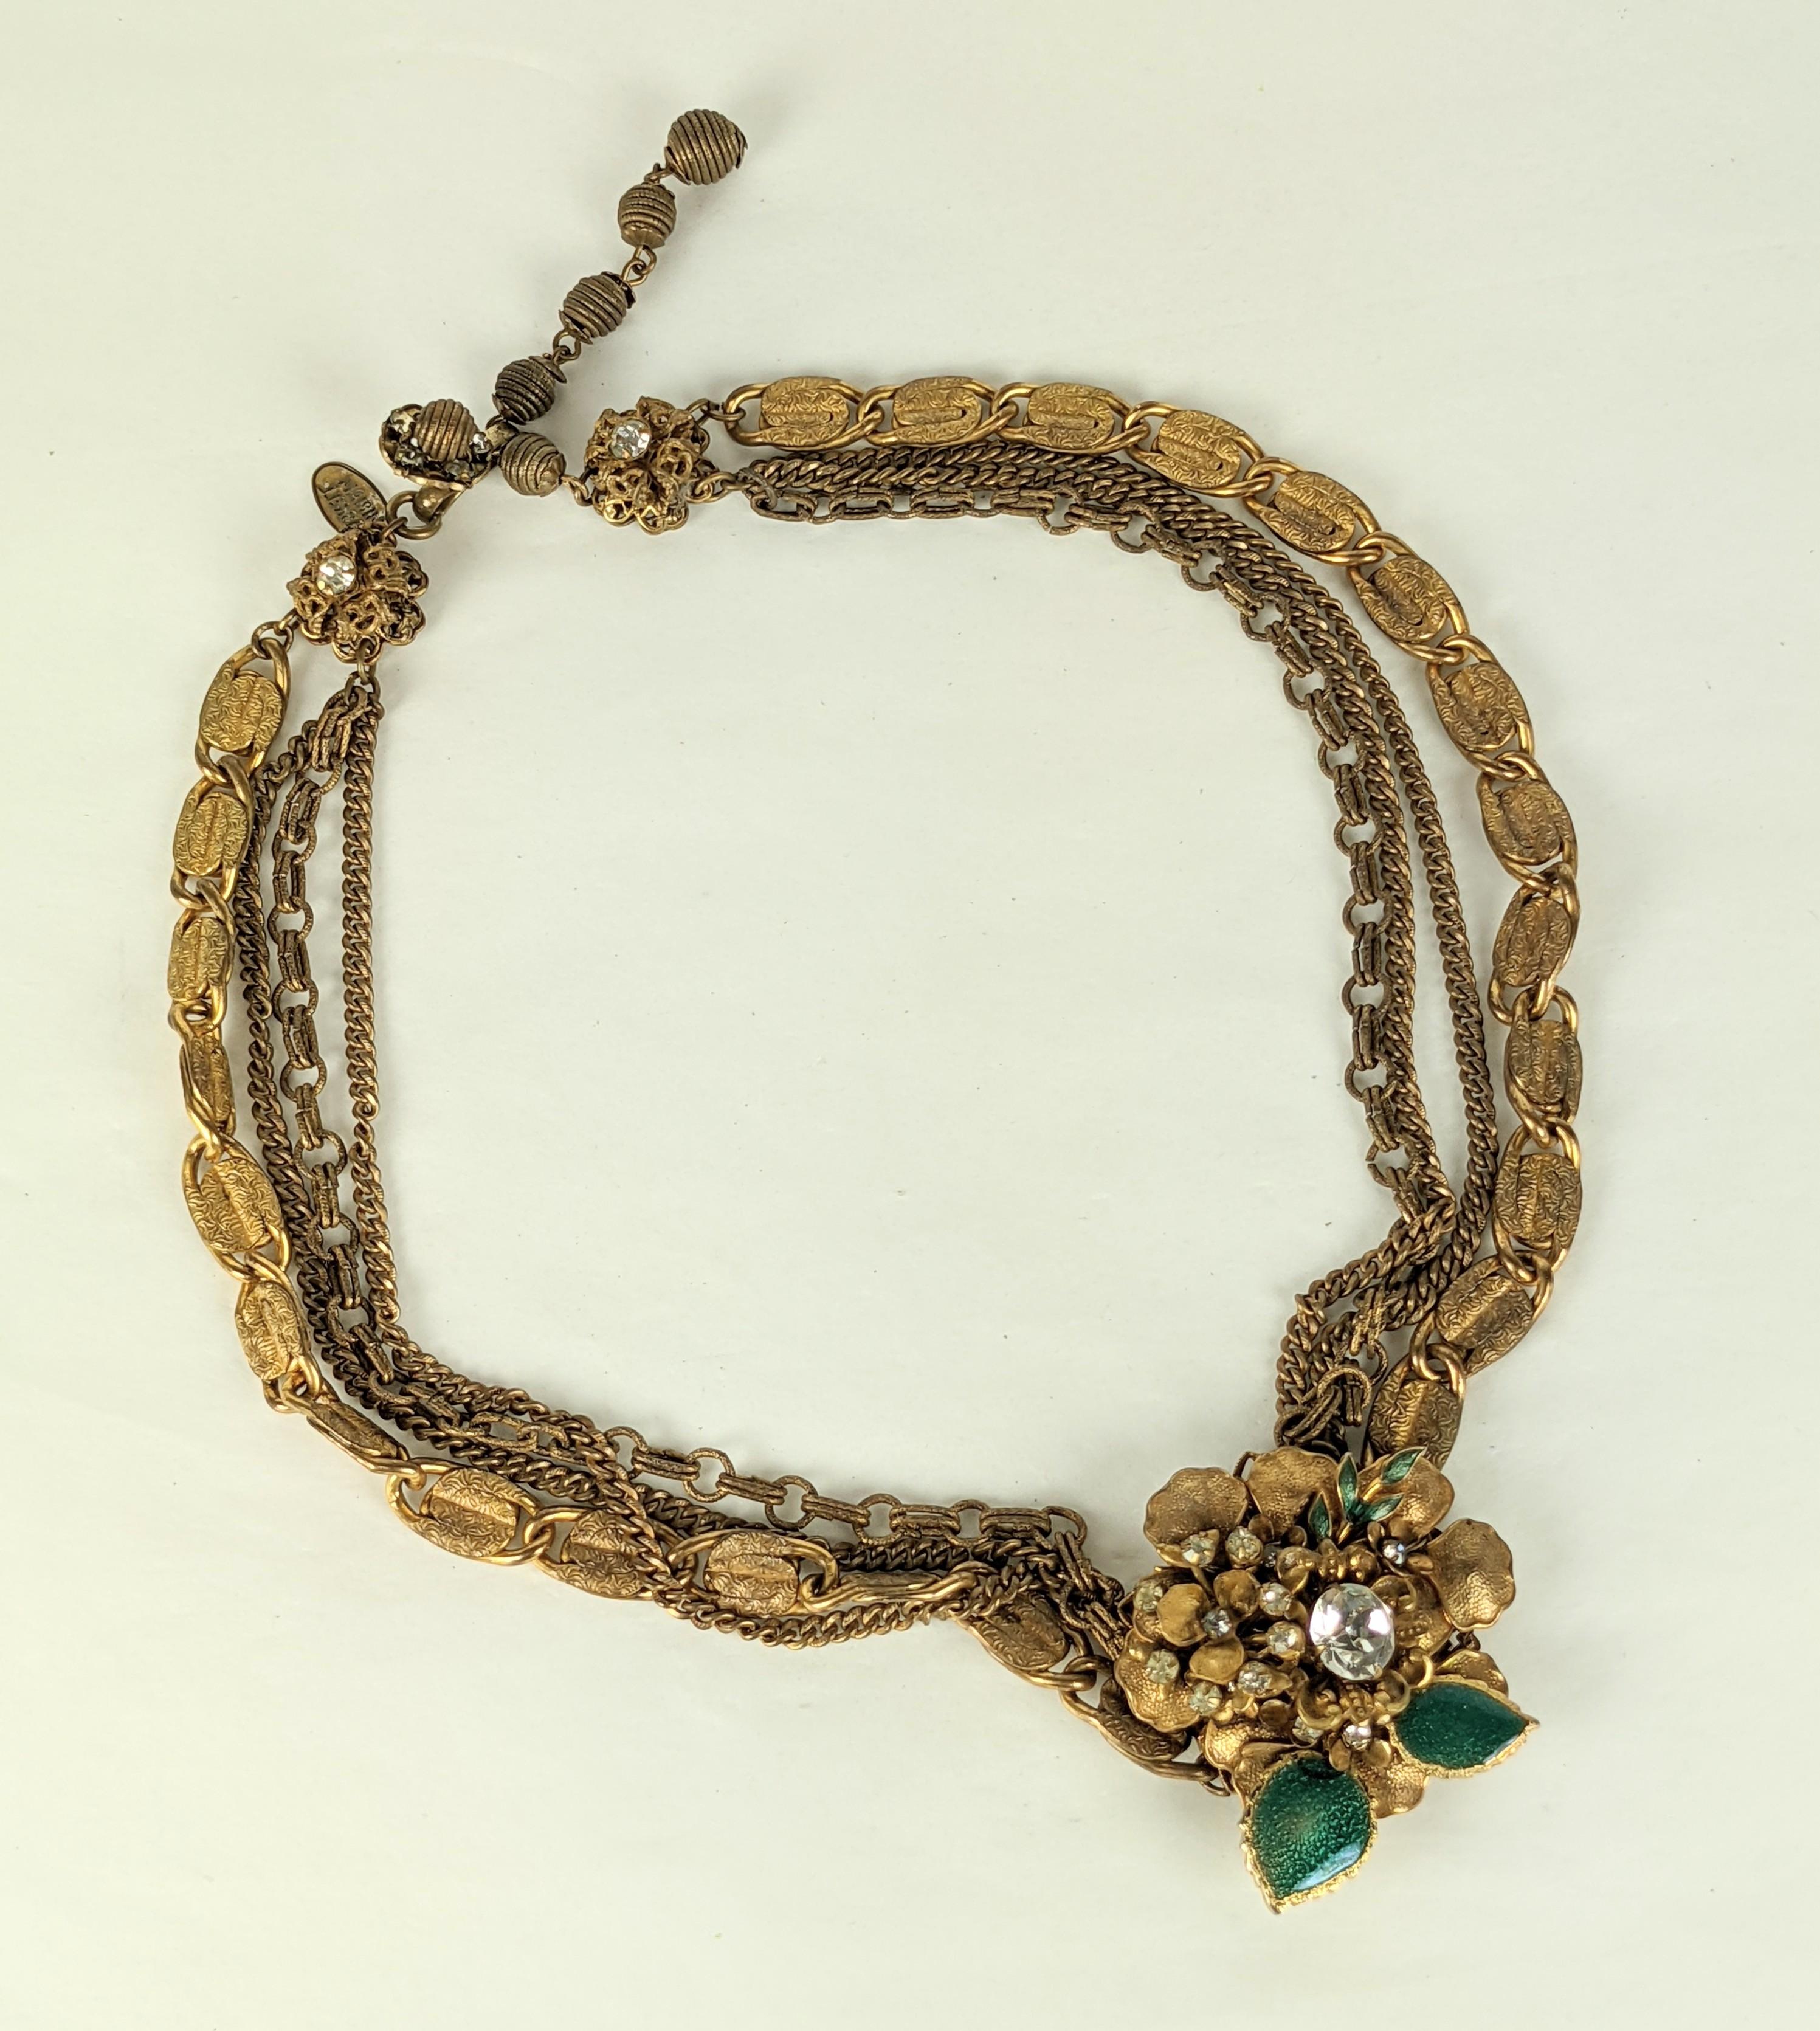 Miriam Haskell Green Enamel and Paste Flower Necklace of varied Russian Gilt chains with central floral station adorned with pastes and green enamel leaves. 
Signed. 1940's USA. Drop 1.5